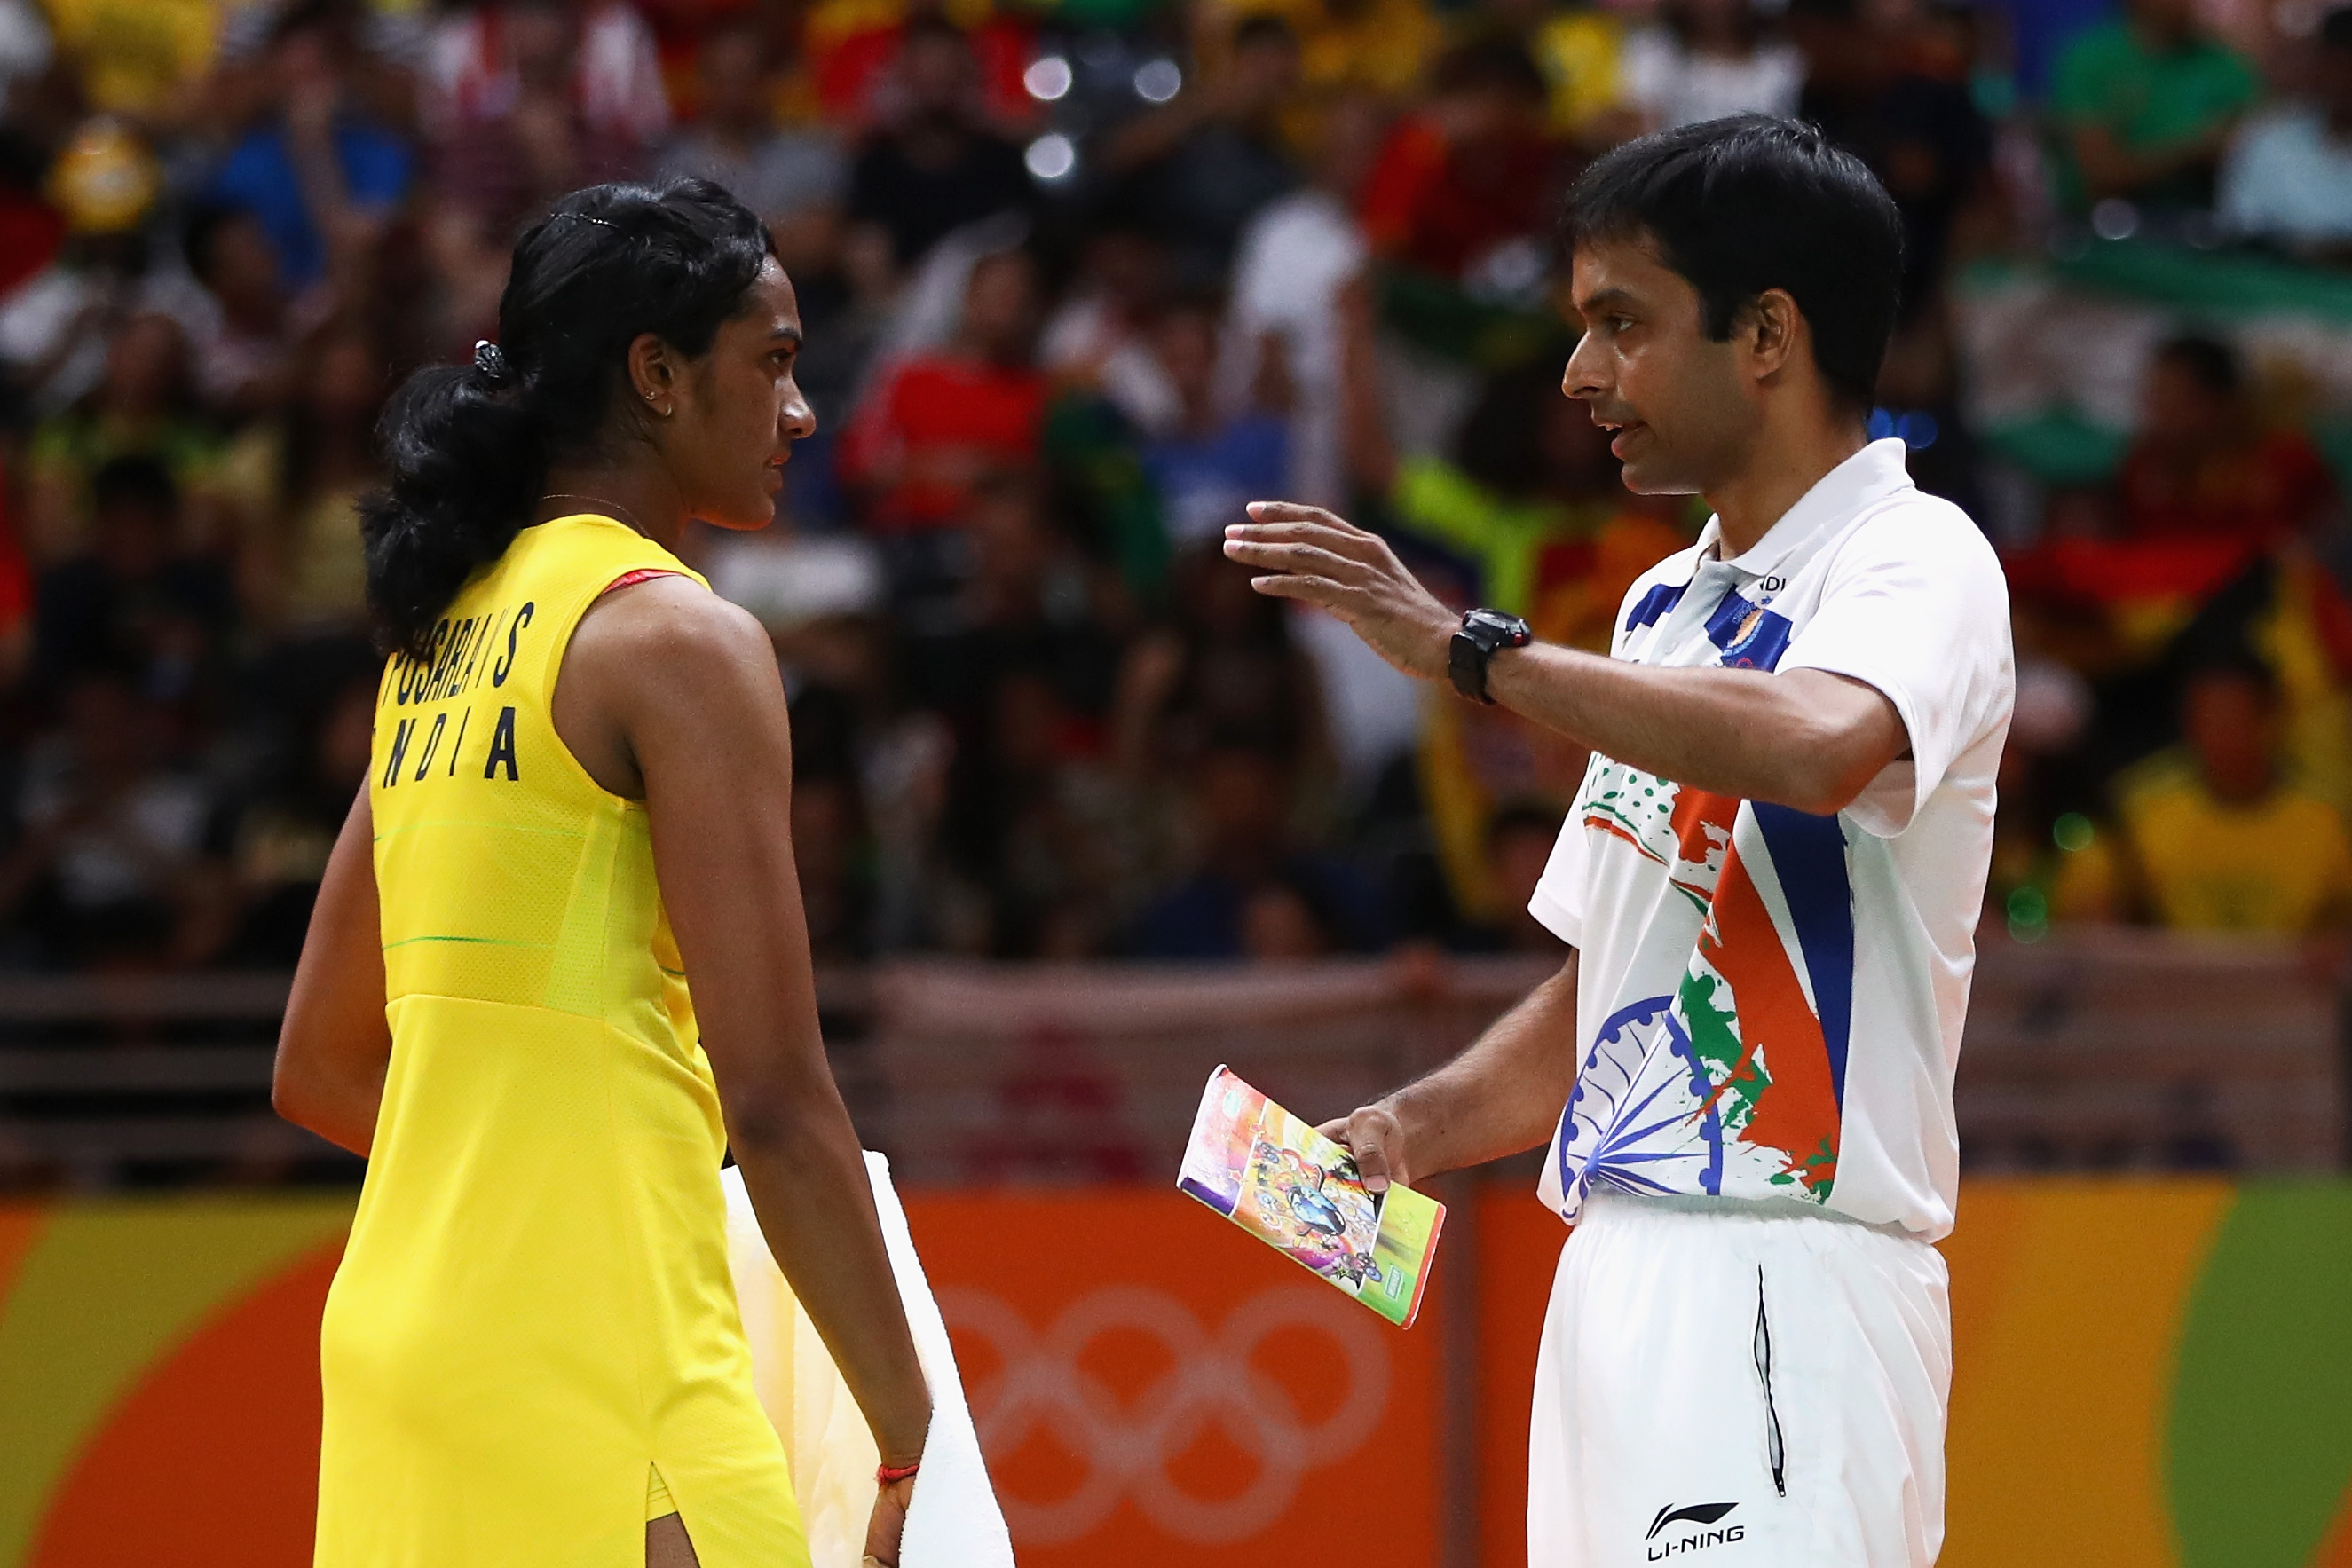 Badminton is the most developed sport in India in the past decade, claims Pullela Gopichand